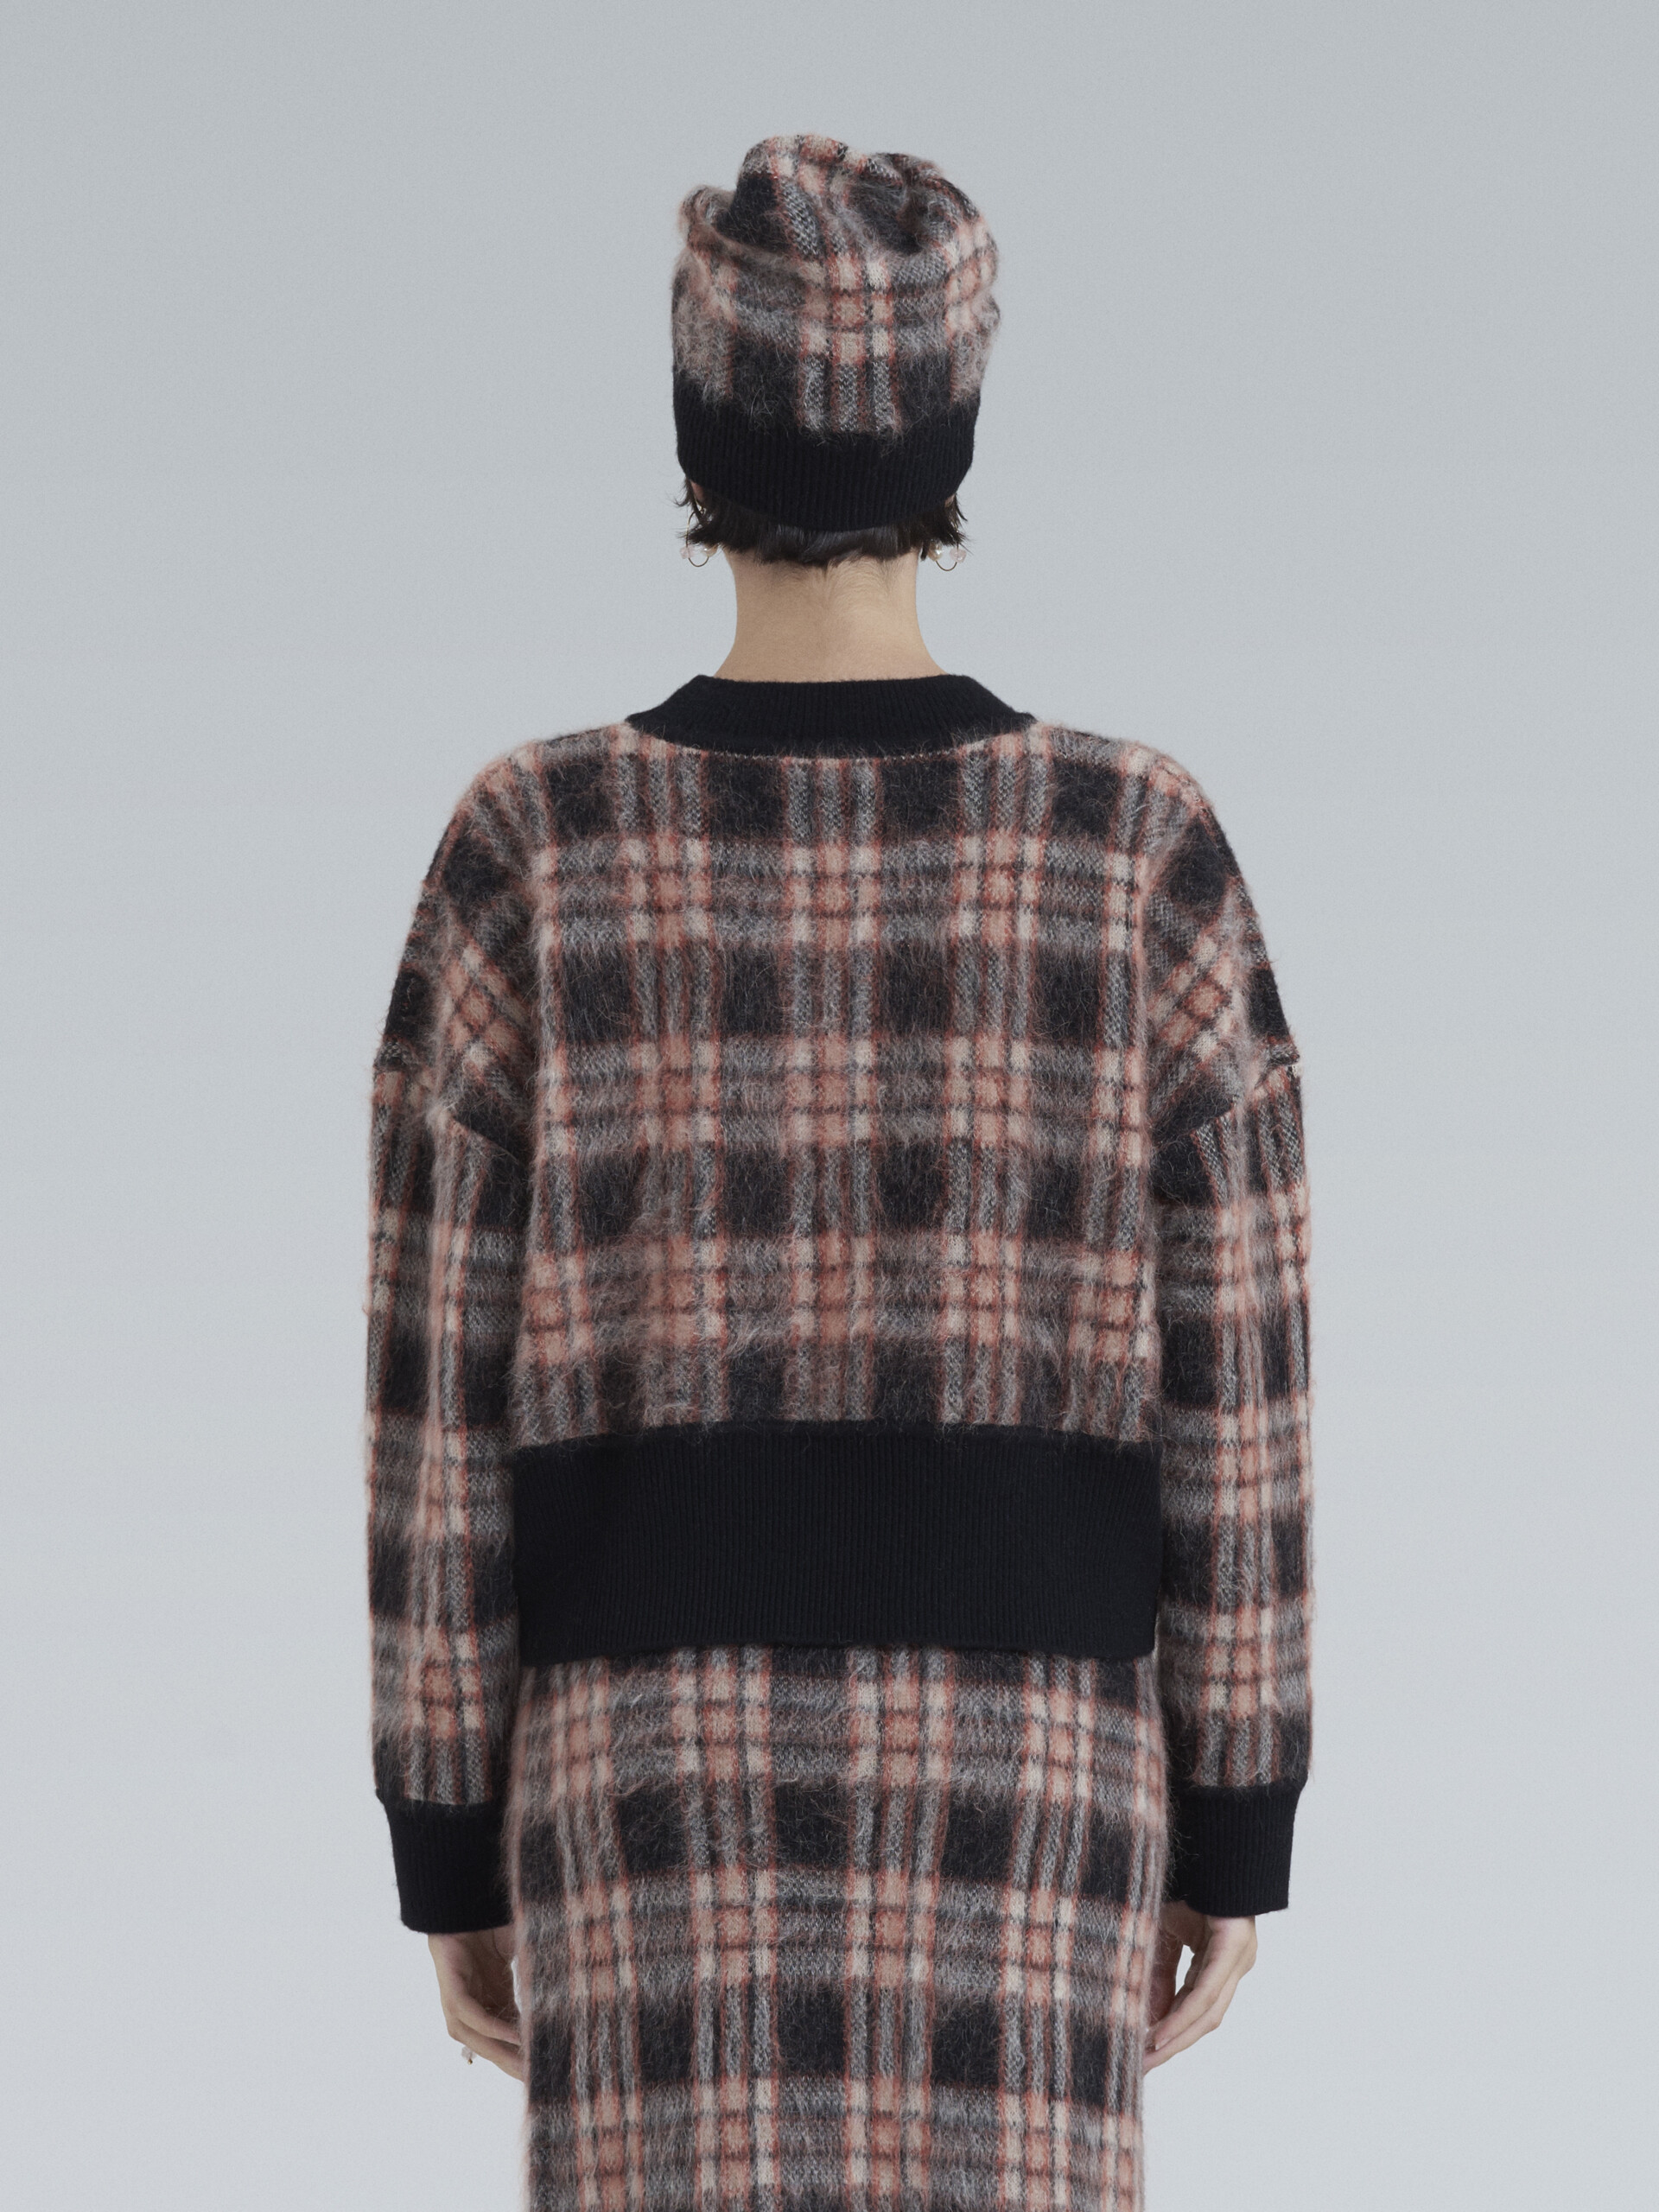 Wool and brushed mohair checked sweater - Pullovers - Image 3